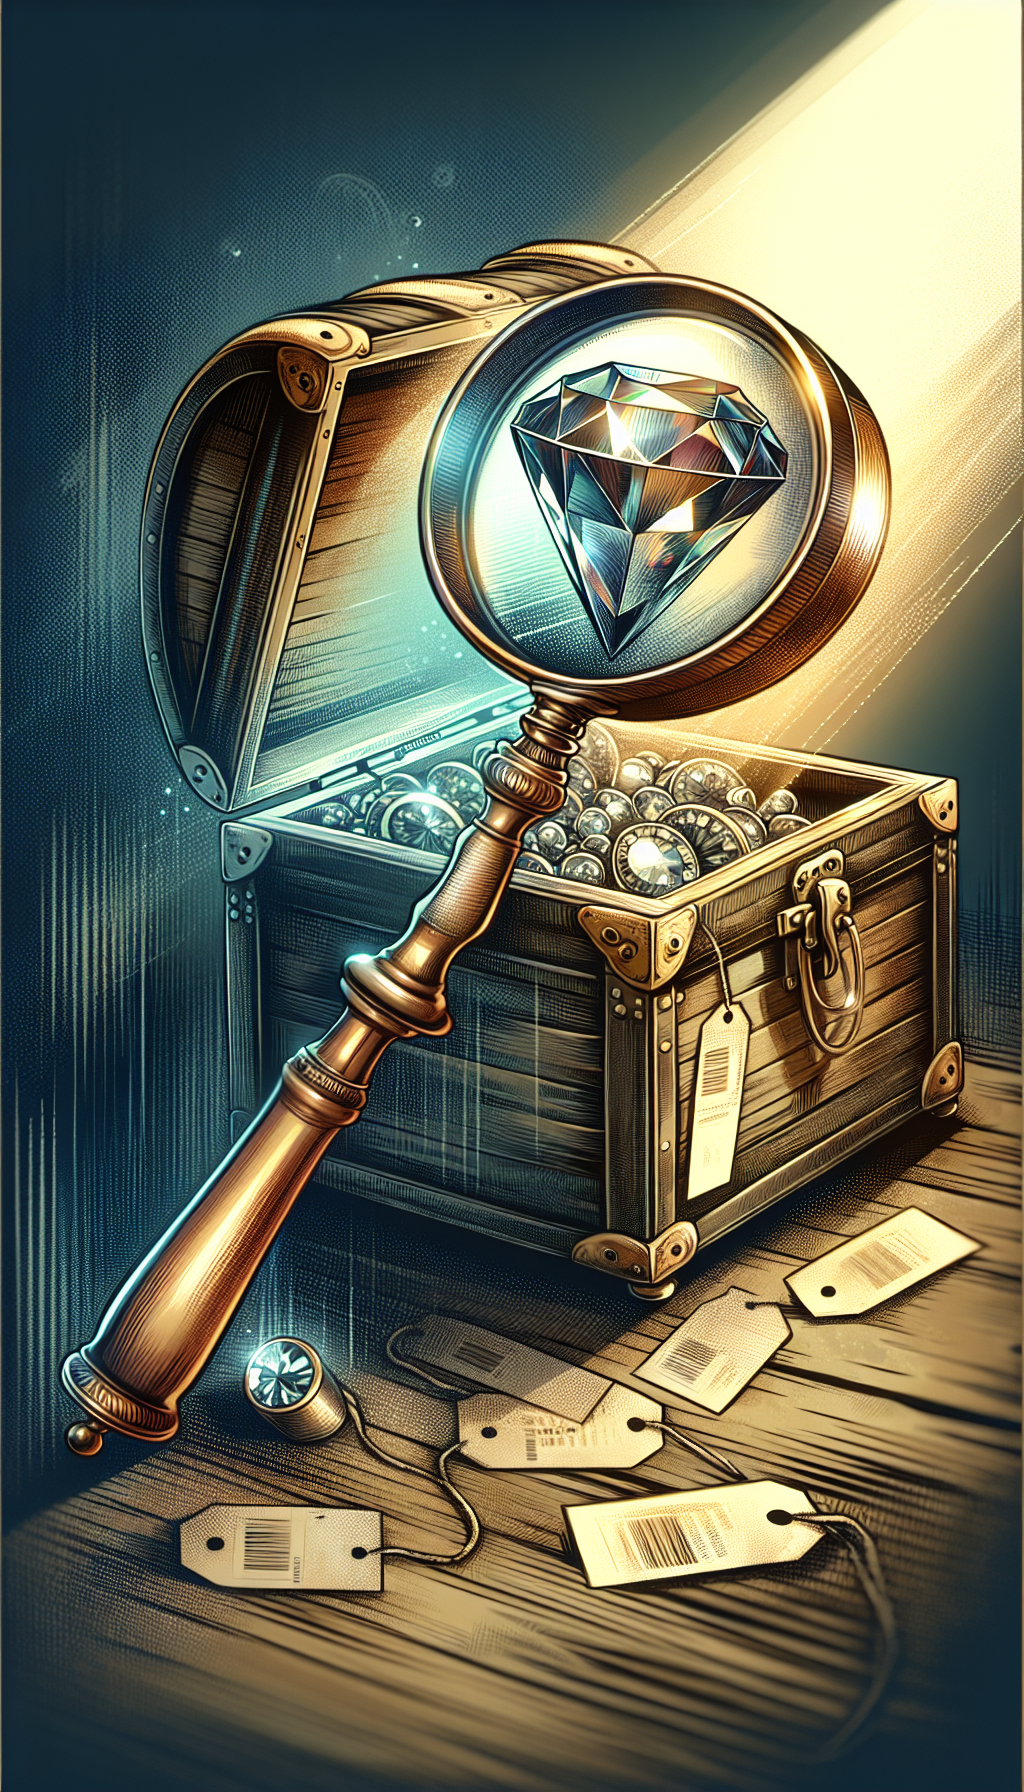 An elegant, antique magnifying glass revealing hidden gems within a treasure chest, focusing on a rare, vintage item with a visible, prestigious provenance tag. The illustration shifts styles from realistic to abstract around the item, symbolizing varying perceptions of value, subtly layered with faded price tags in the background to suggest the fluctuating nature of antique values.